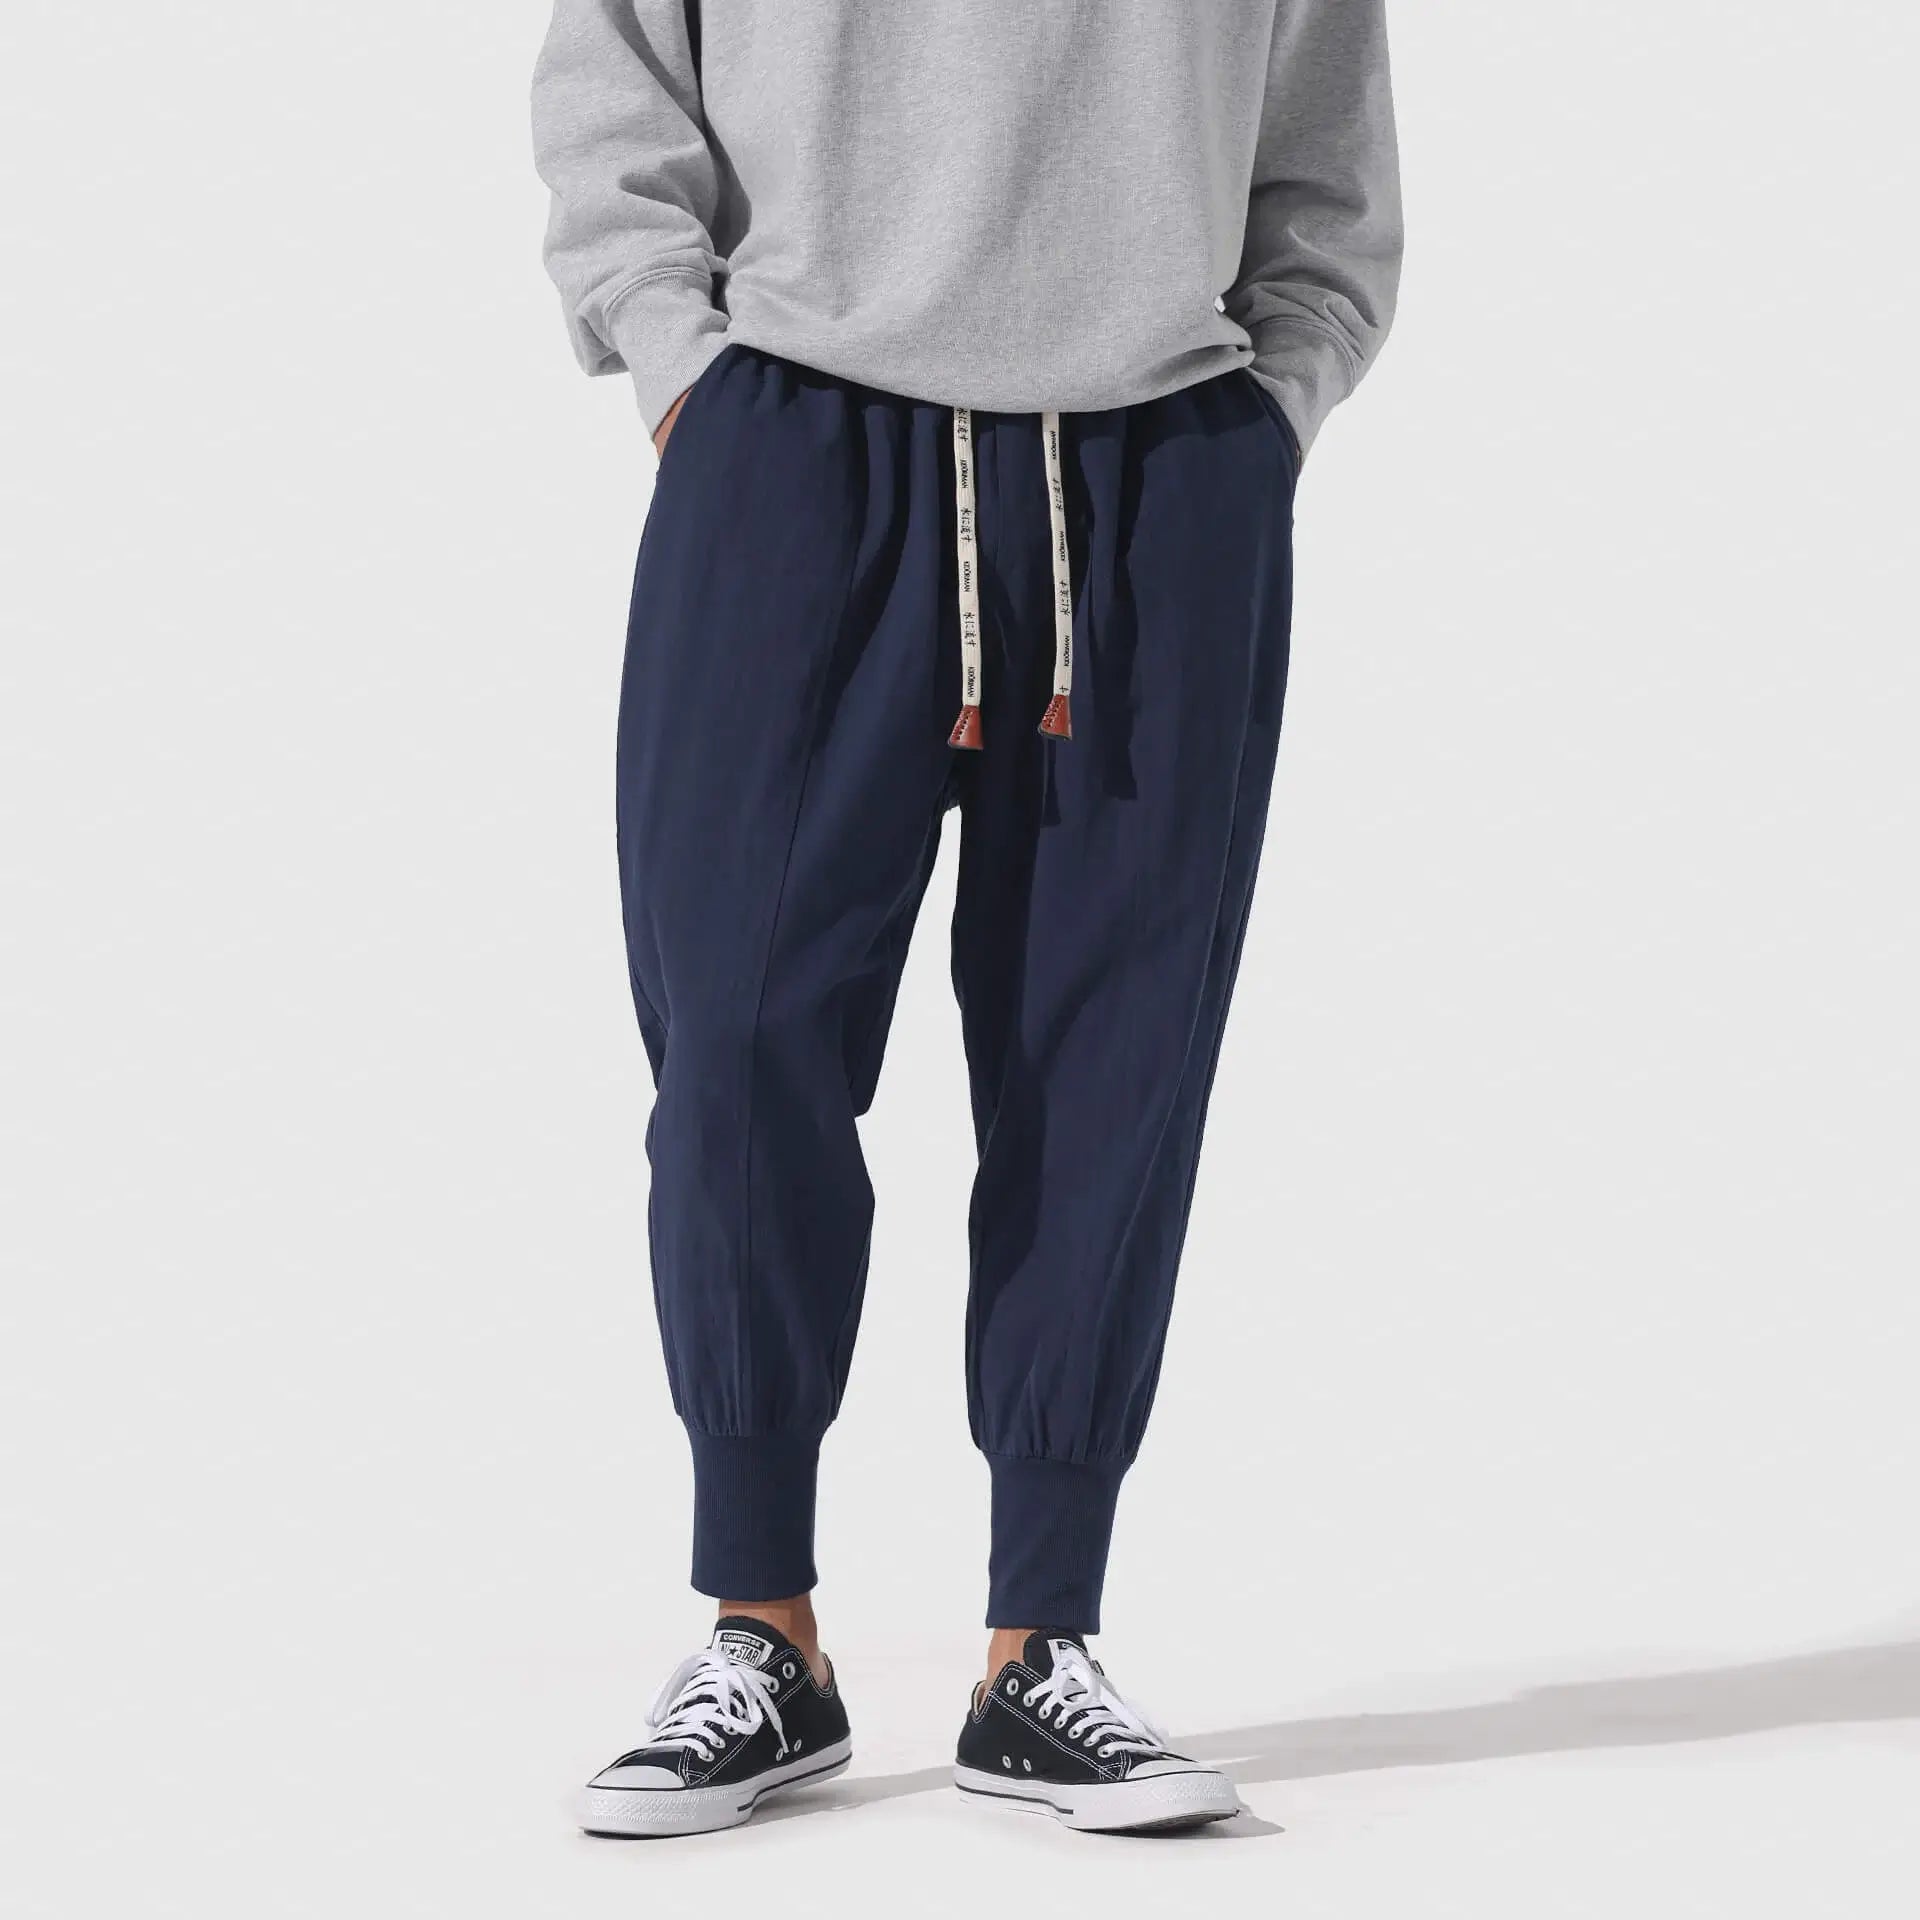 Fashion Hip Hop Streetwear Harem Pants Men Sweatpants Loose Baggy Joggers  Track Pants Cotton Casual Trousers Male Clothes T200417 From Chao02, $51.18  | DHgate.Com